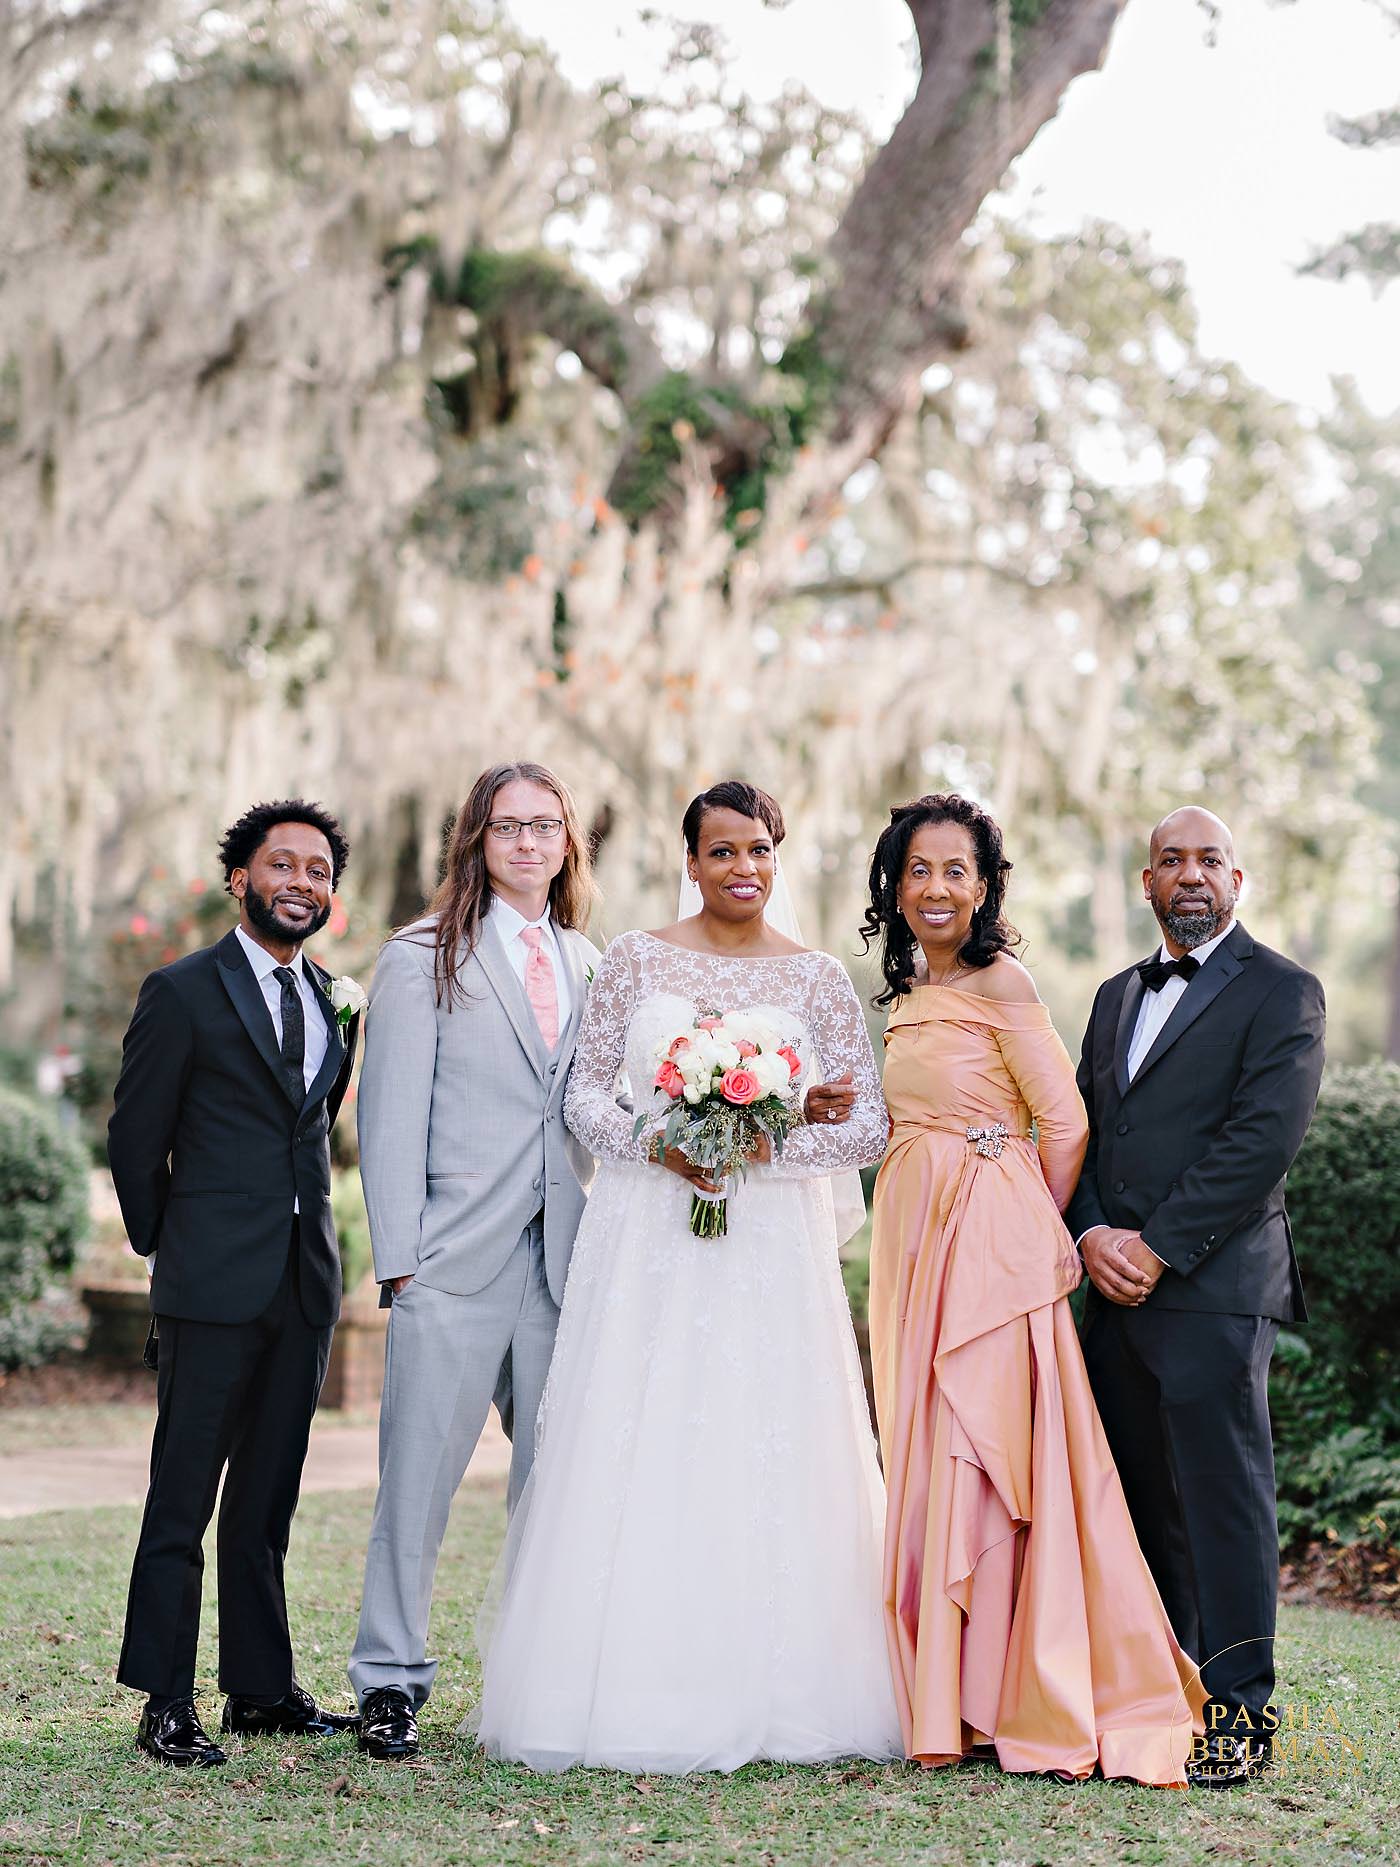 An Intimate Debordieu Club Wedding in Georgetown by Top Wedding PHotographers at Pasha Belman Photography